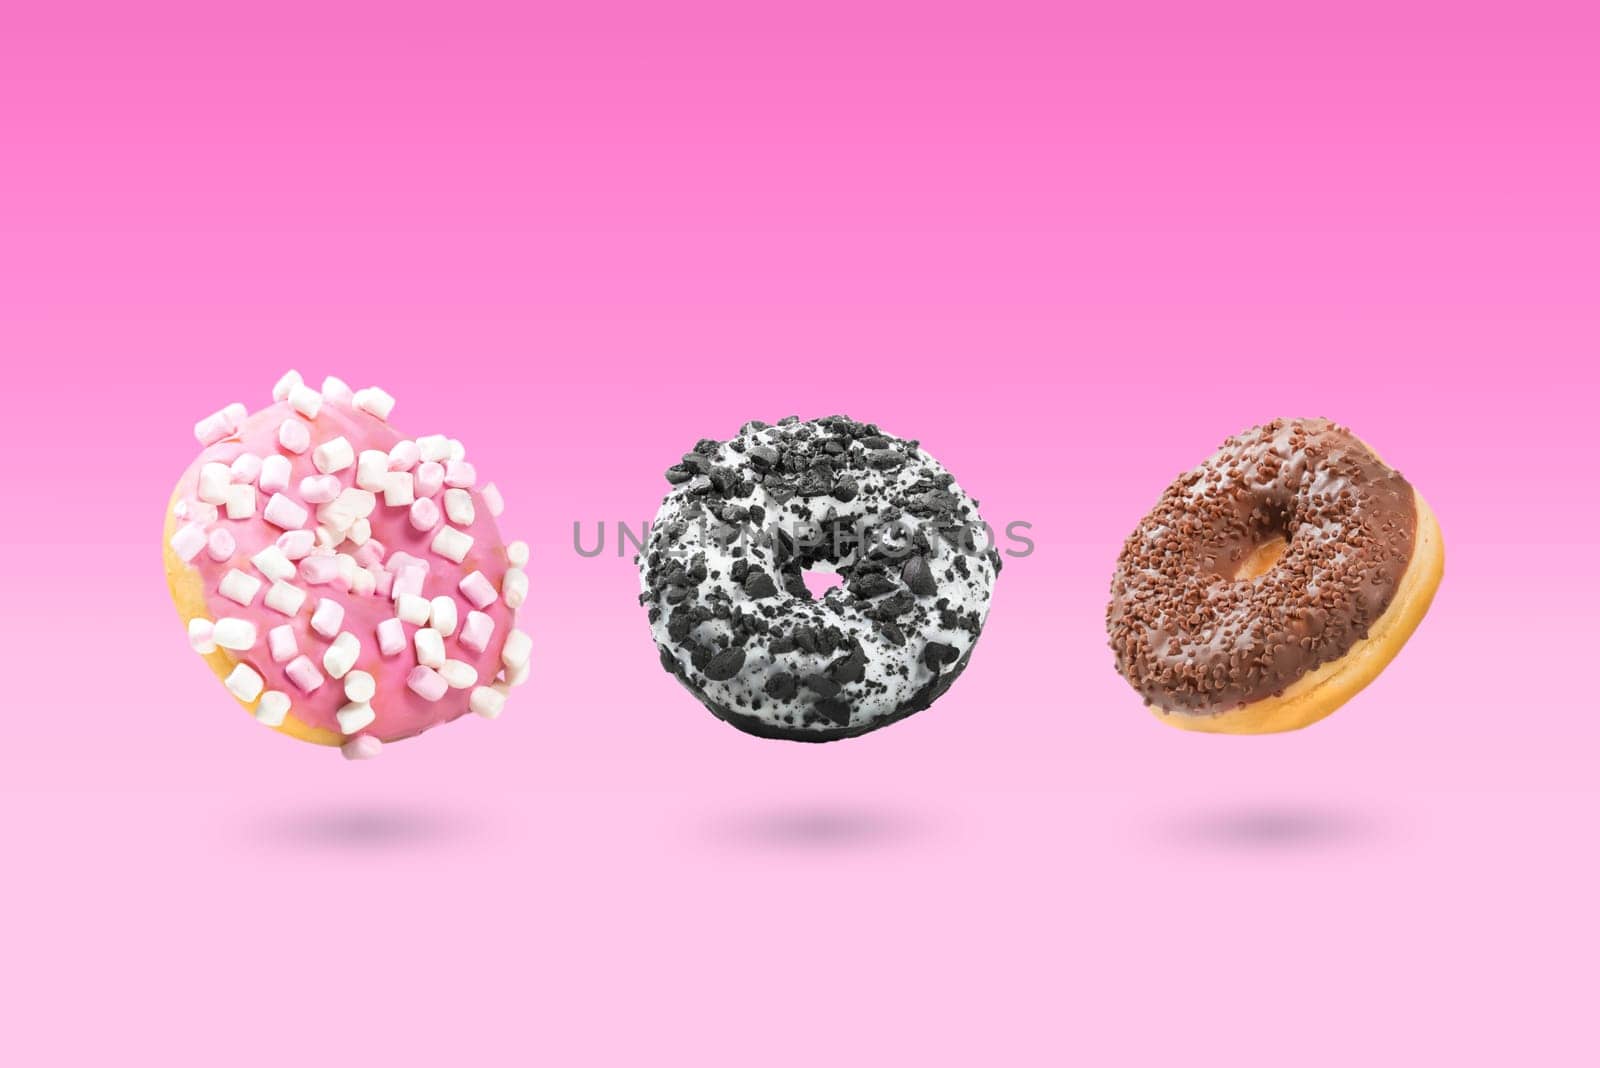 Delicious donut on color background. Mix of flying multicolored doughnuts